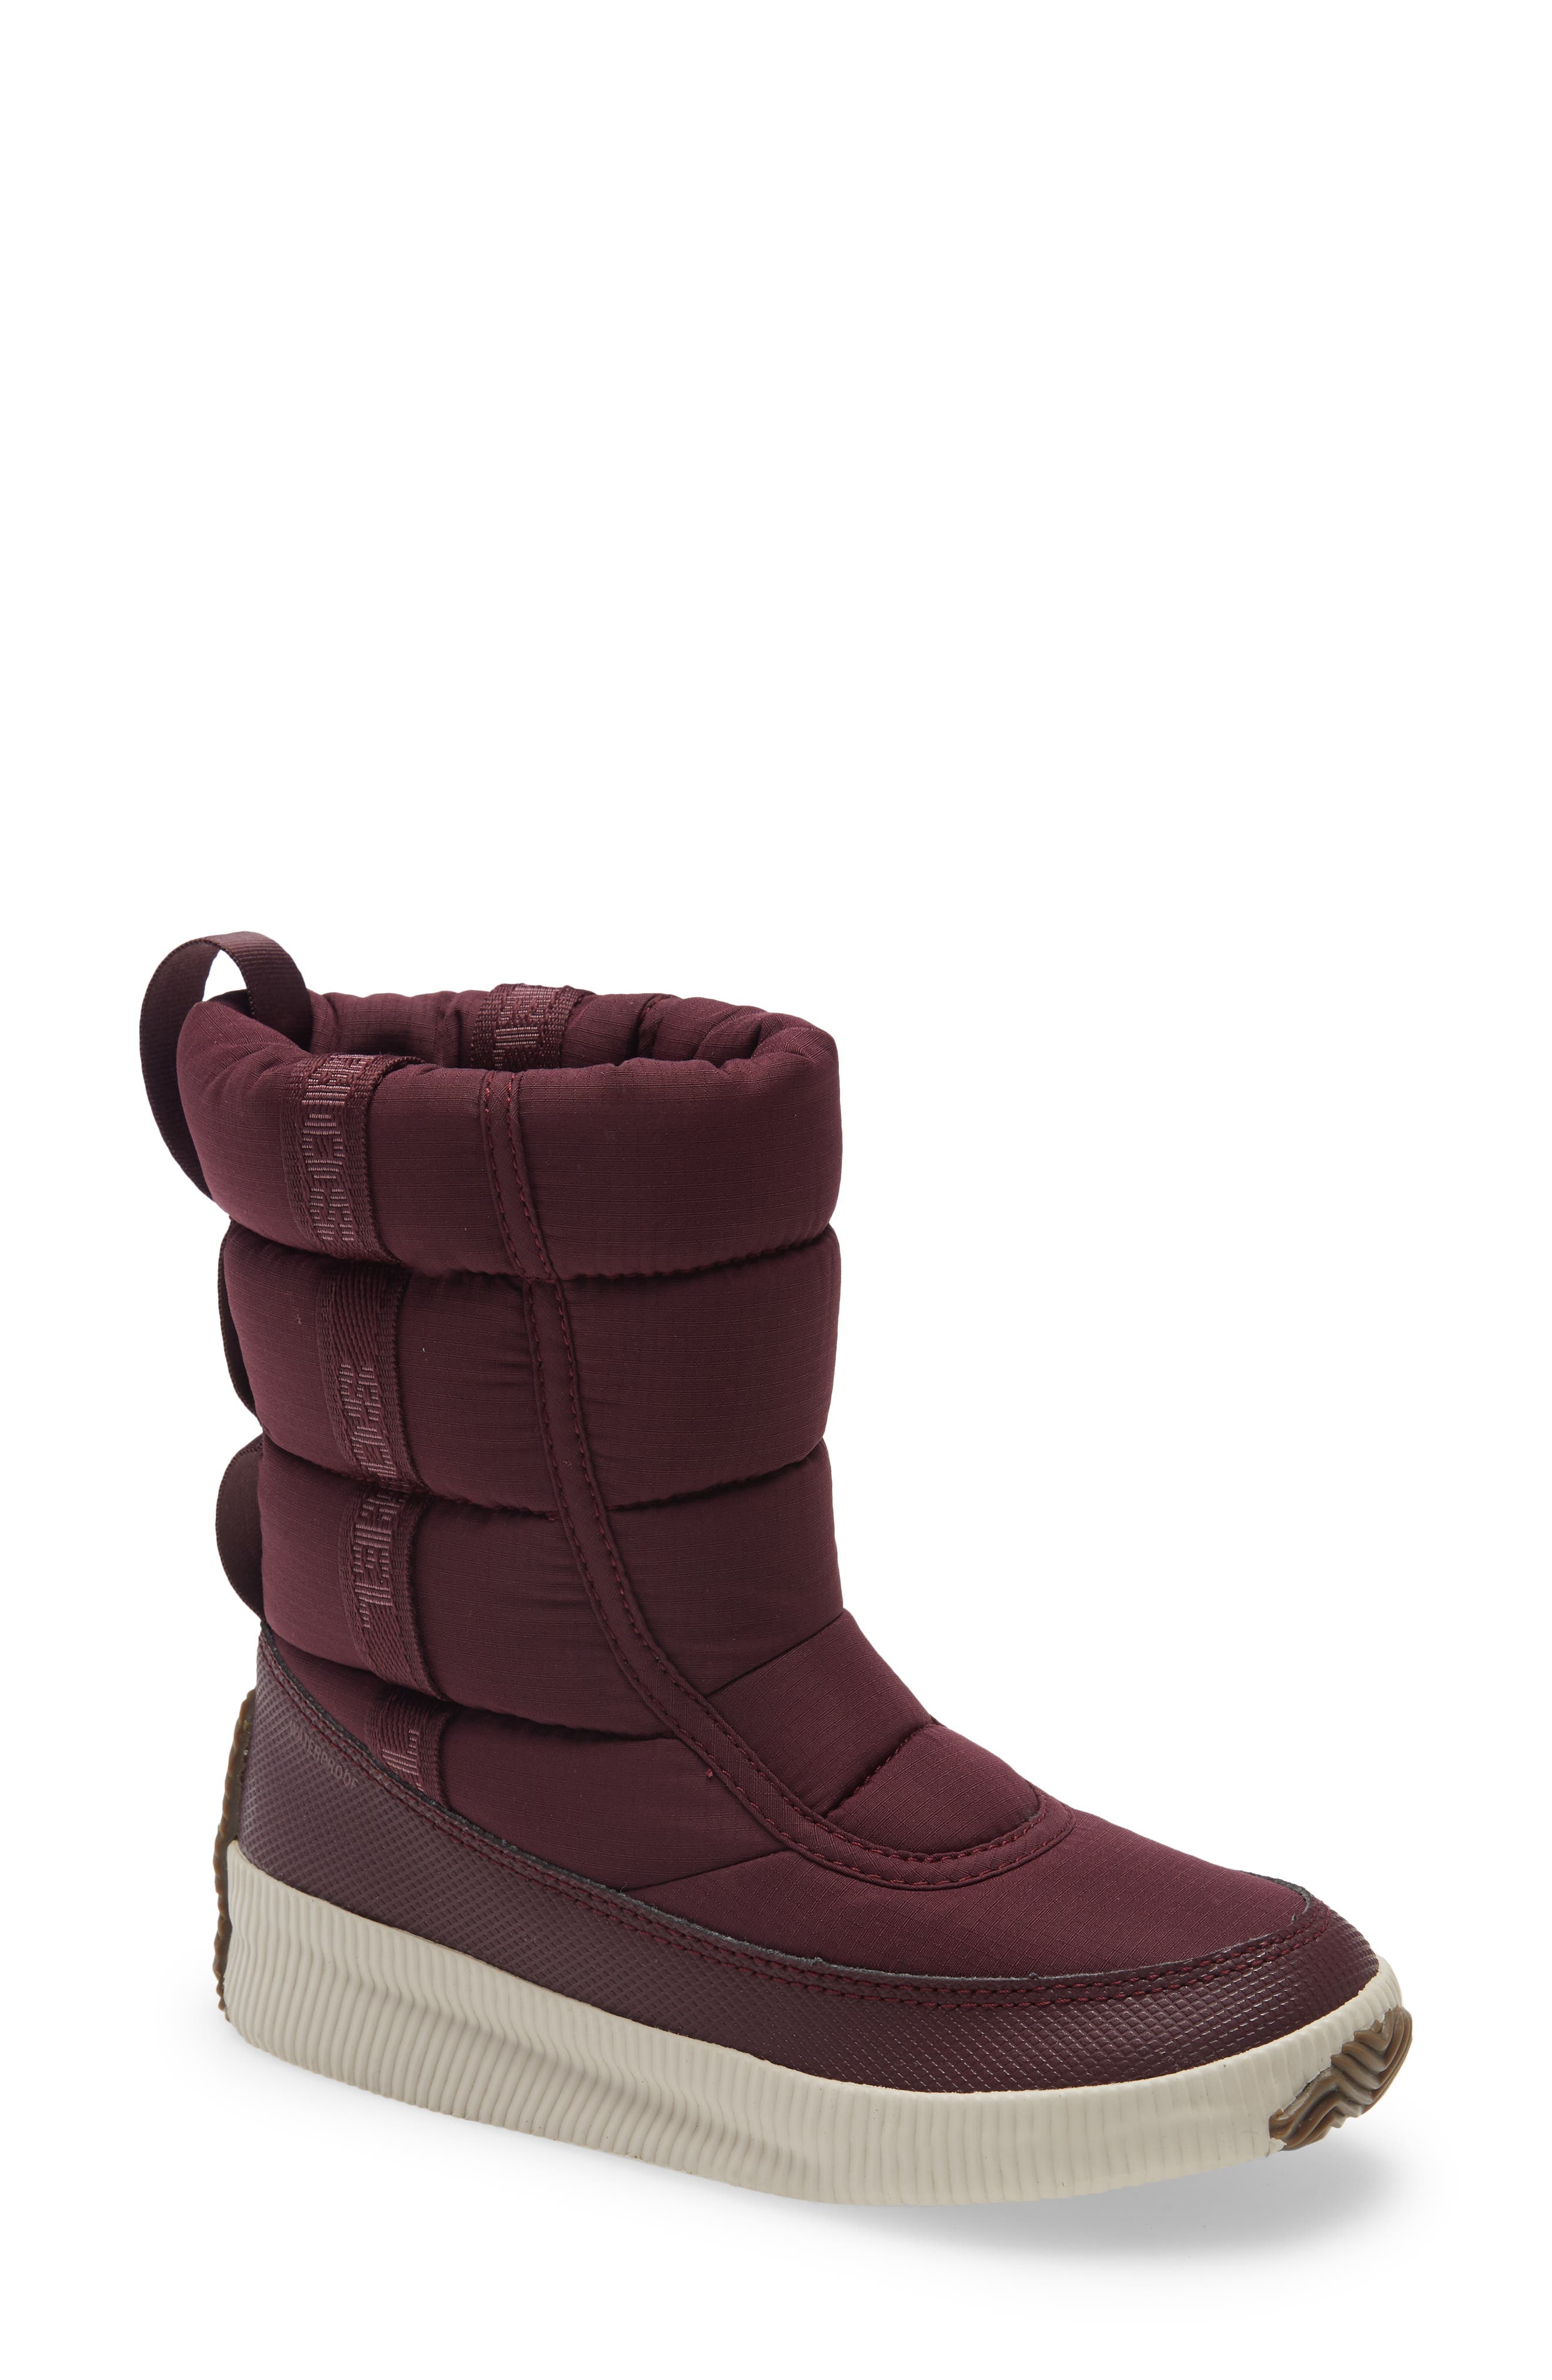 Sorel Out 'n About Puffy Waterproof Snow Boot In Epic Plum